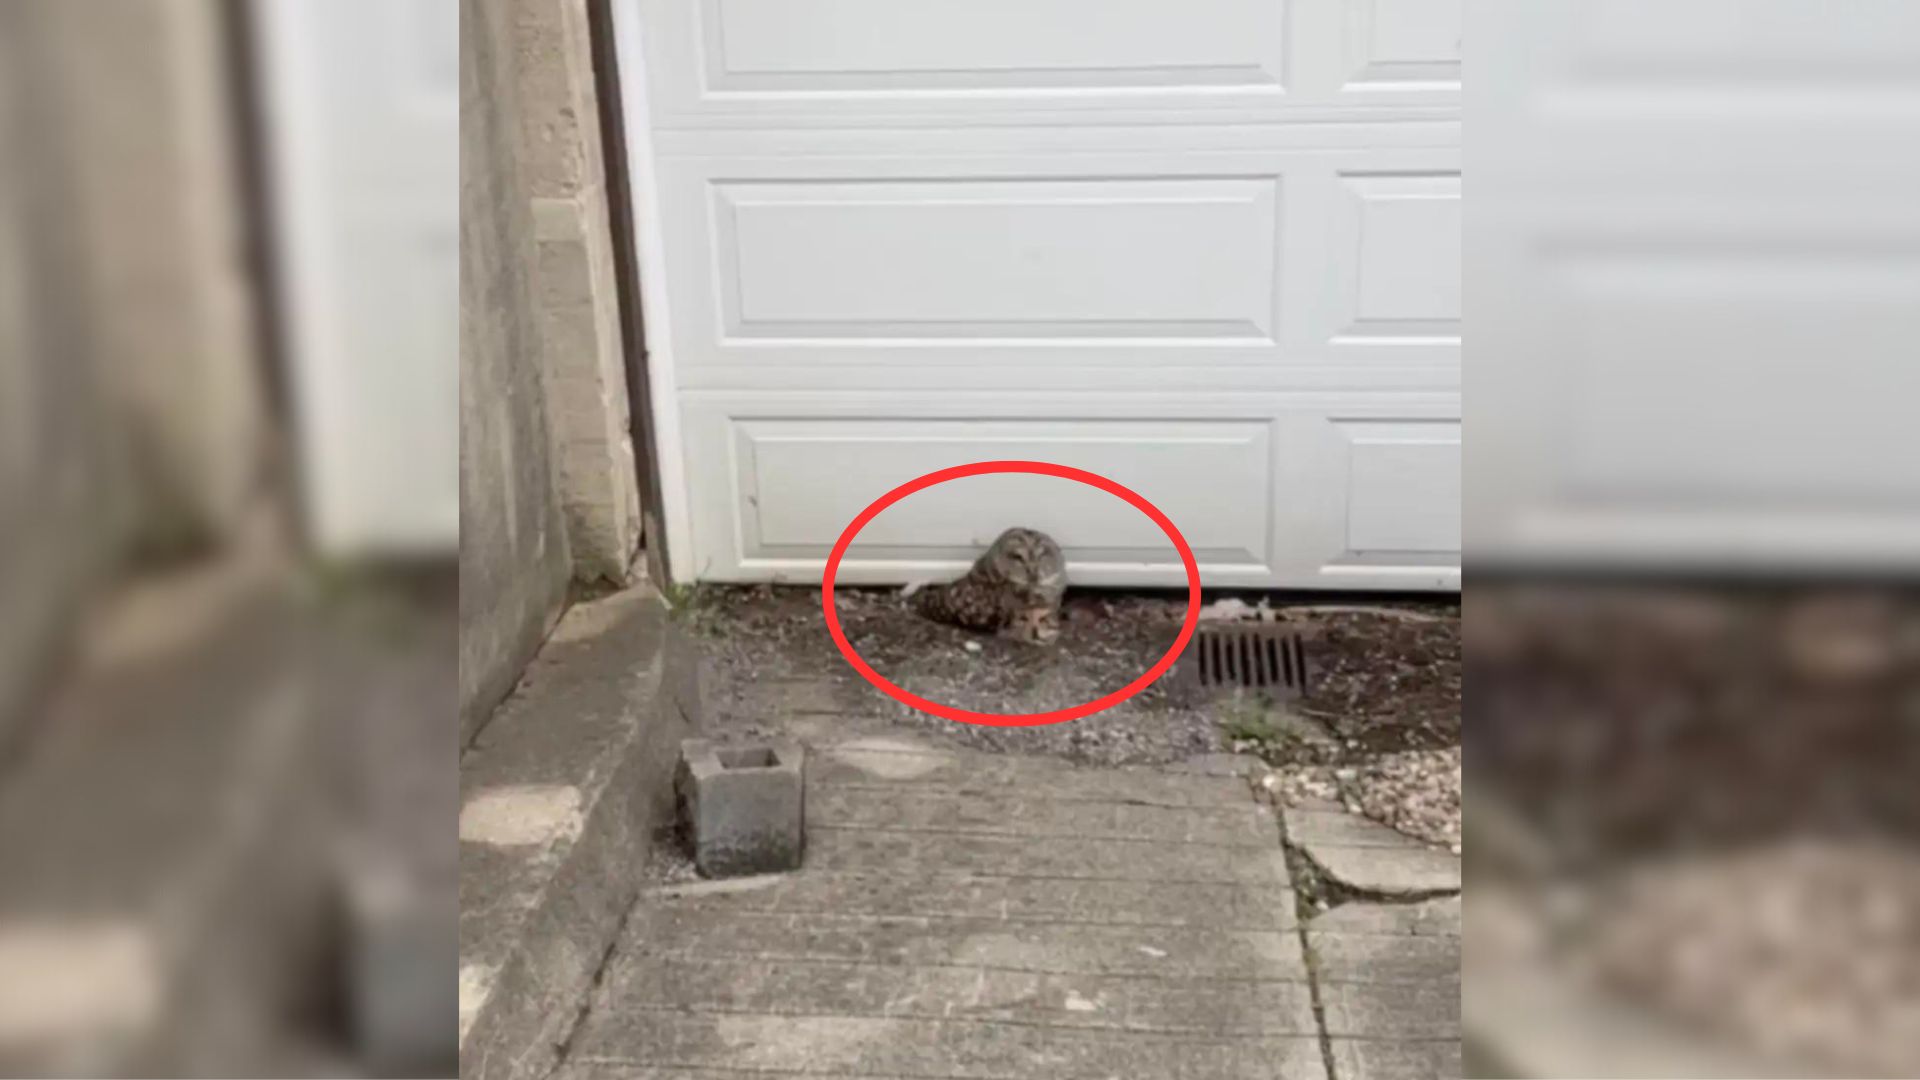 Plumber From Ohio Noticed A Feathery Animal Near A Garage Door And Went To Investigate It